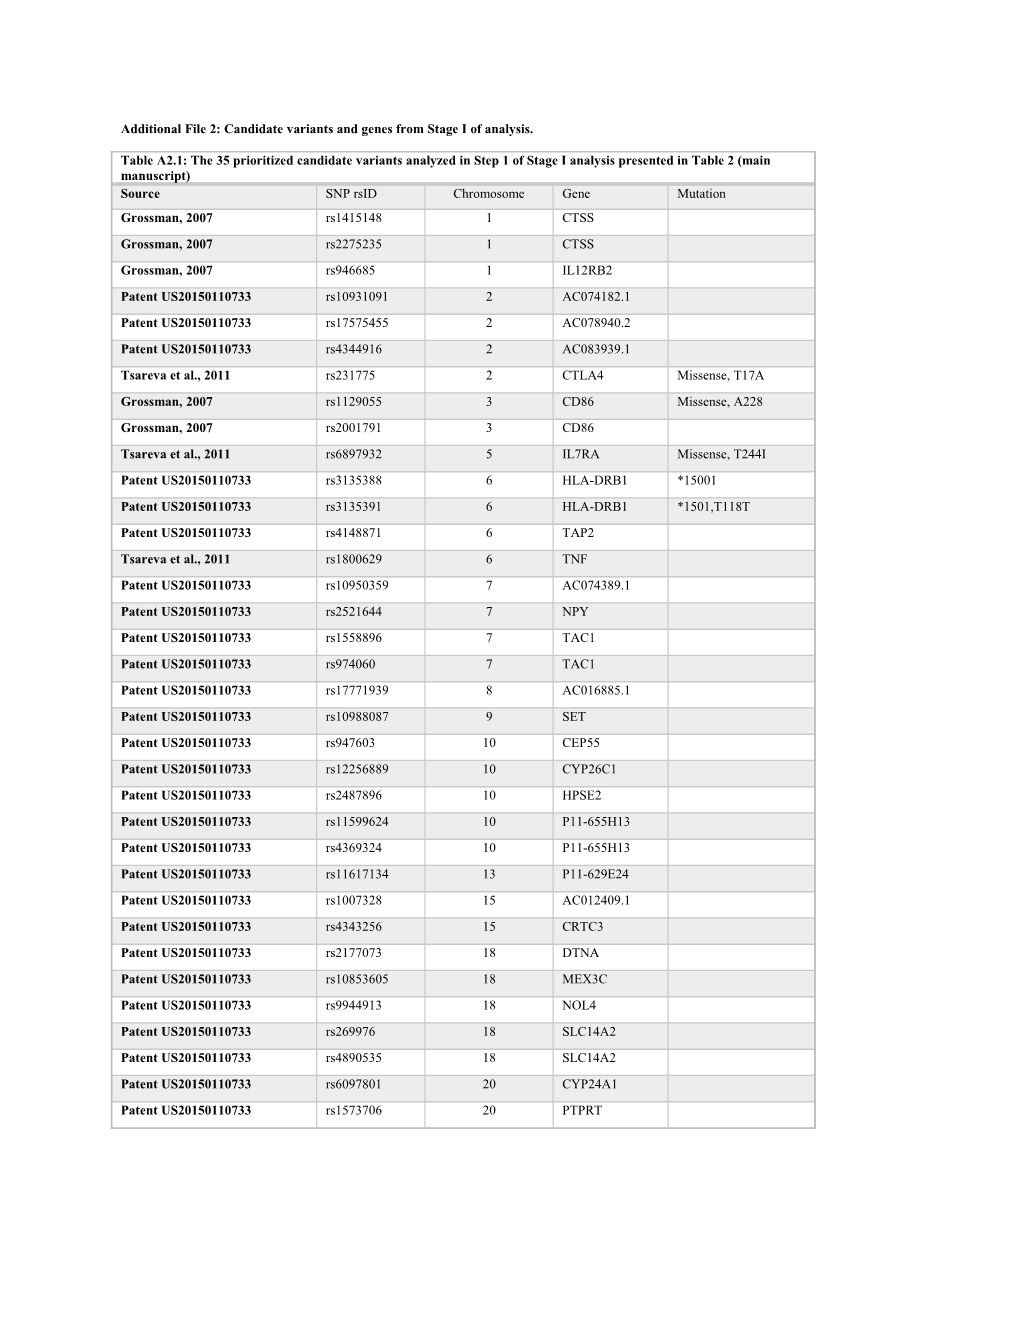 Additional File 2: Candidate Variants and Genes from Stage I of Analysis